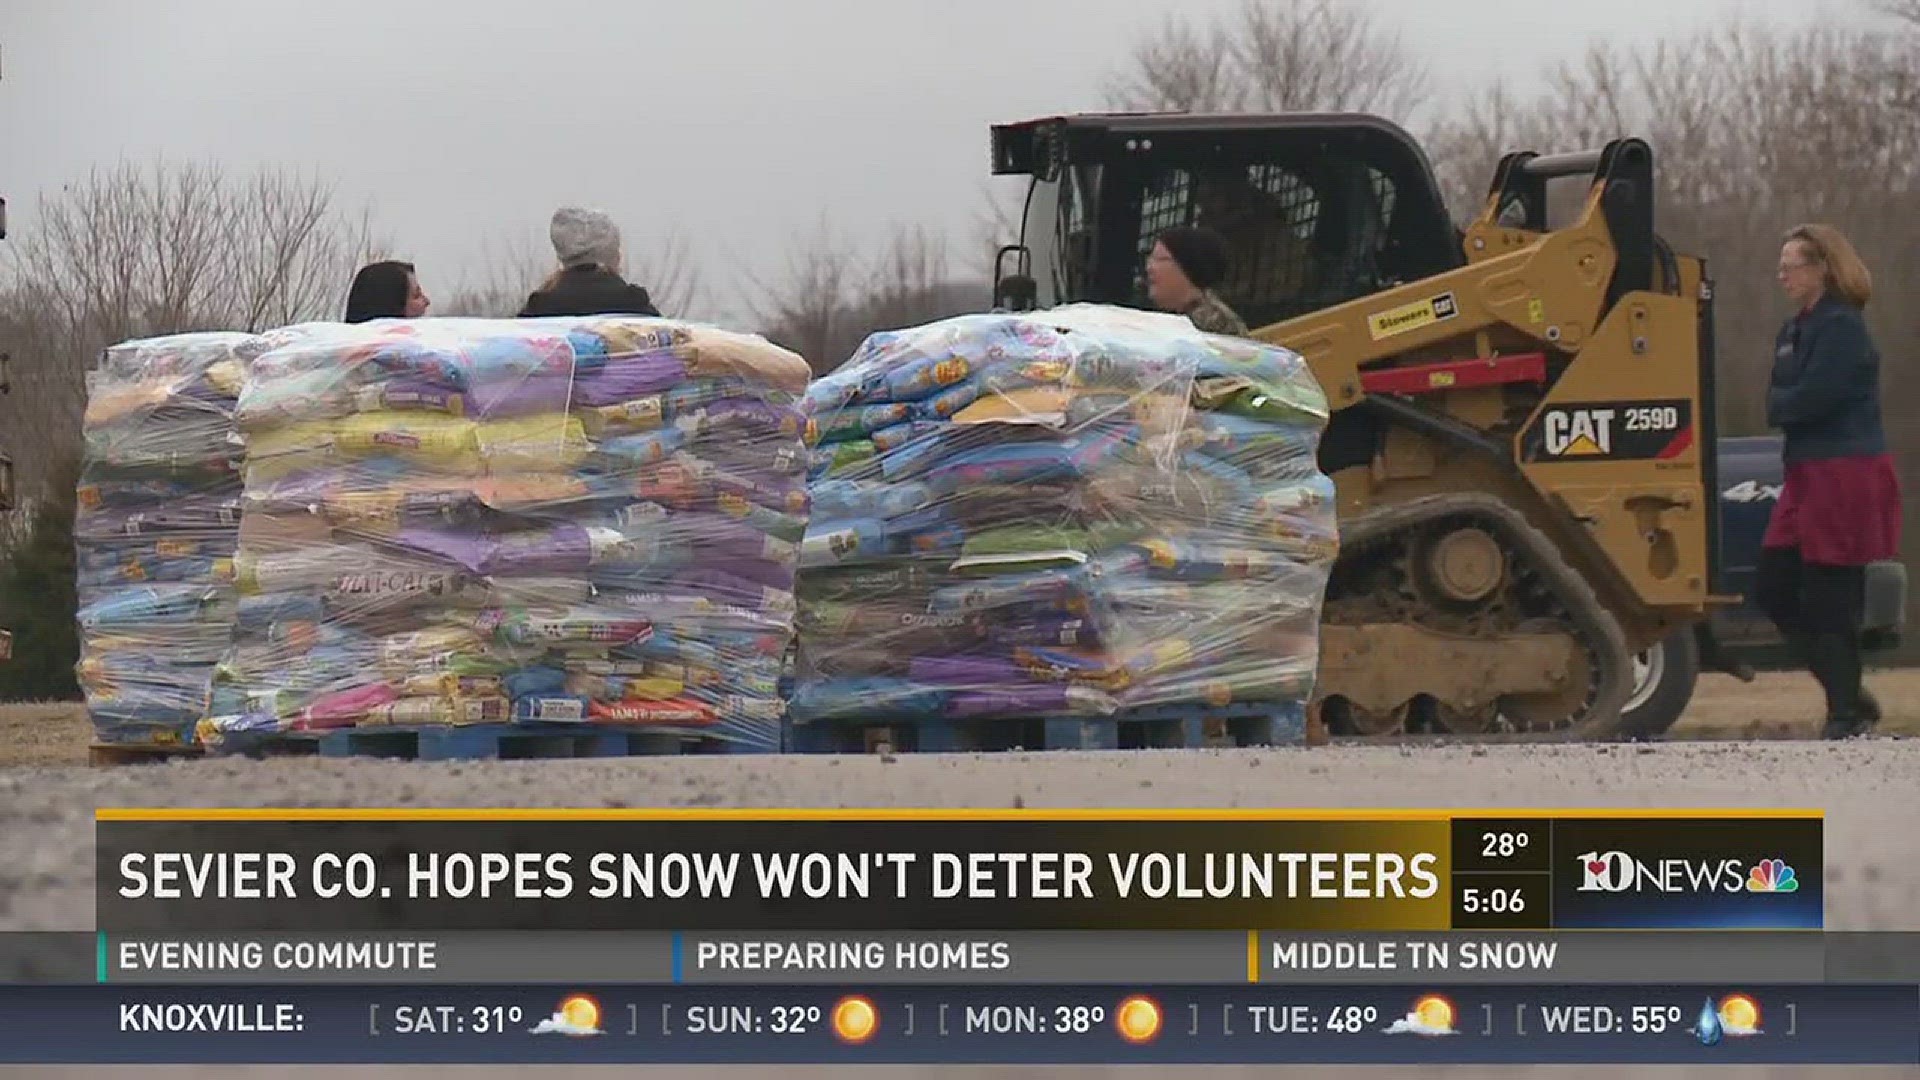 Most of Sevier Co. is untouched by the snow so far, and leaders are hopoing that the winter weather won't keep volunteers from helping the Sevier Co. Humane Society, which desperately needs help moving supplies this weekend.